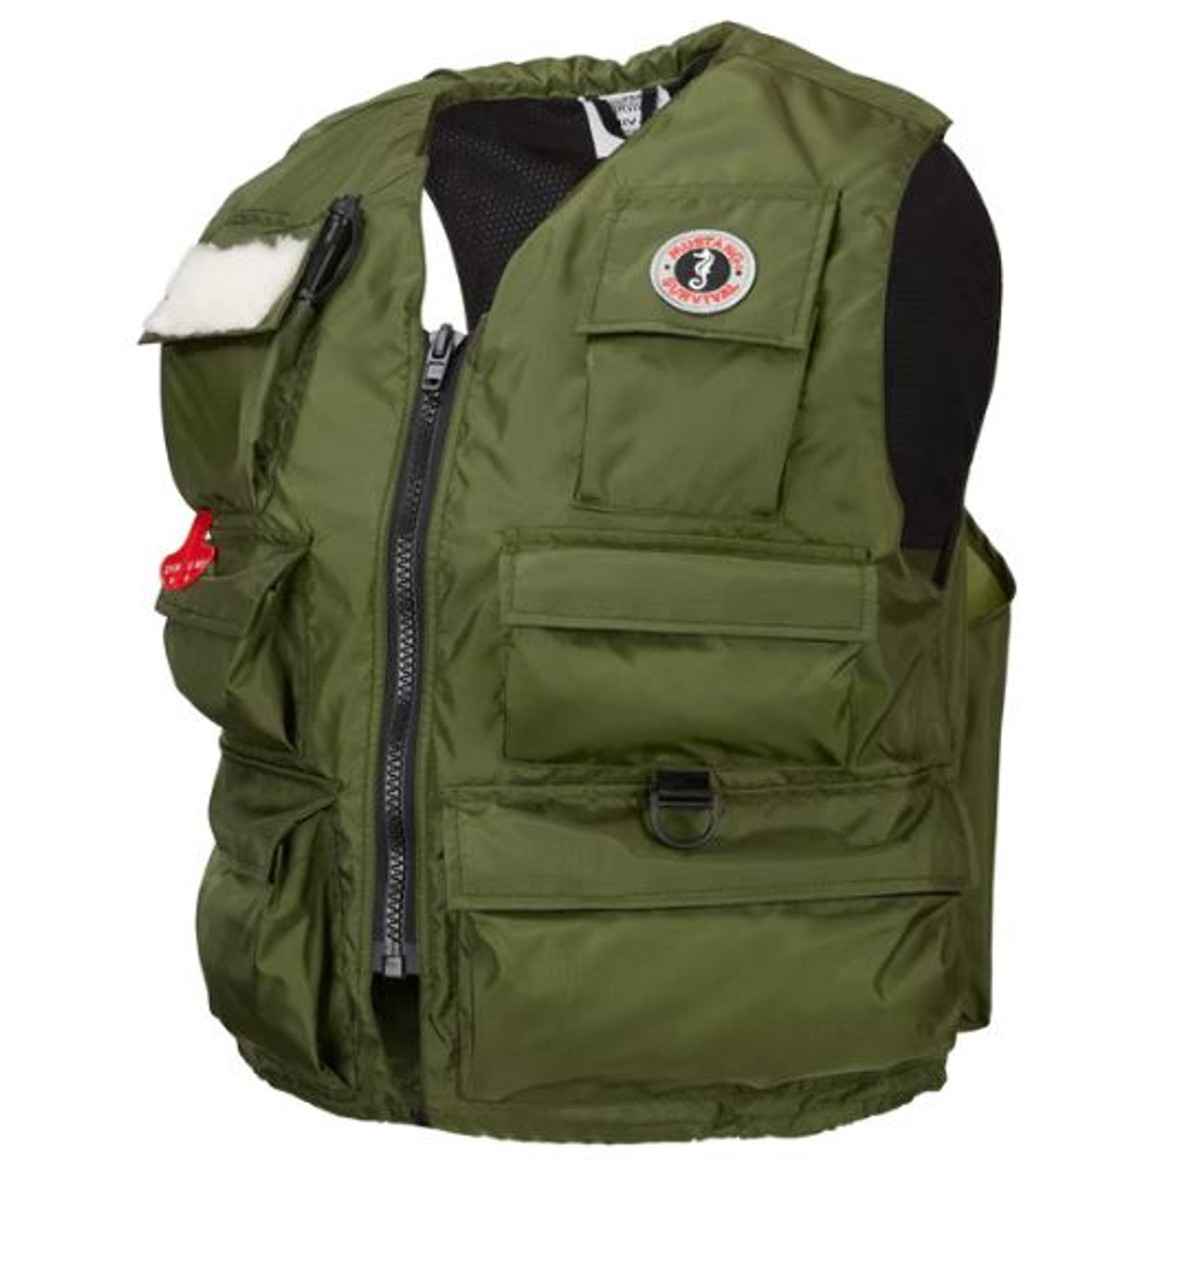 Mustang Survival - Manual Inflatable Fisherman's Vest - Olive, Small